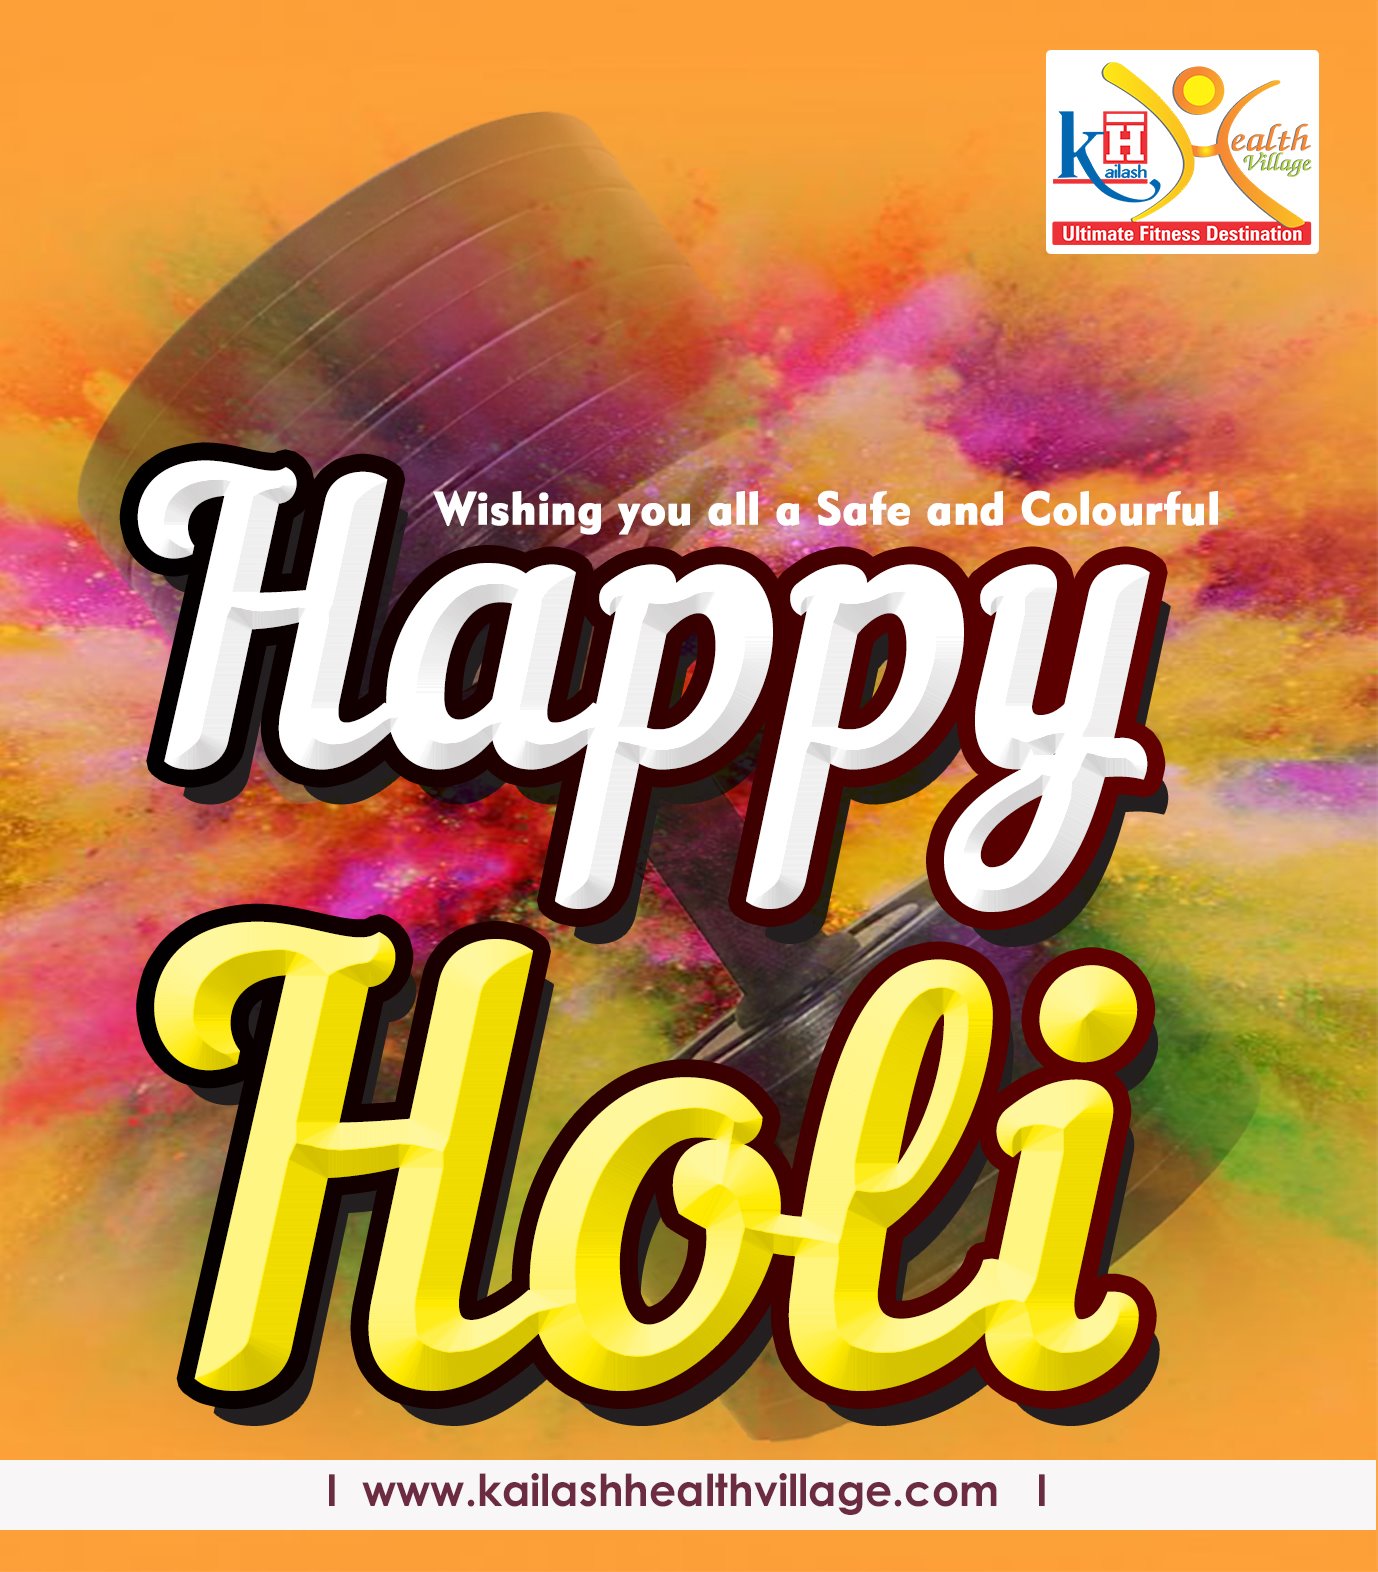 Kailash Health Village wishes you all a Safe & Colorful Happy Holi.